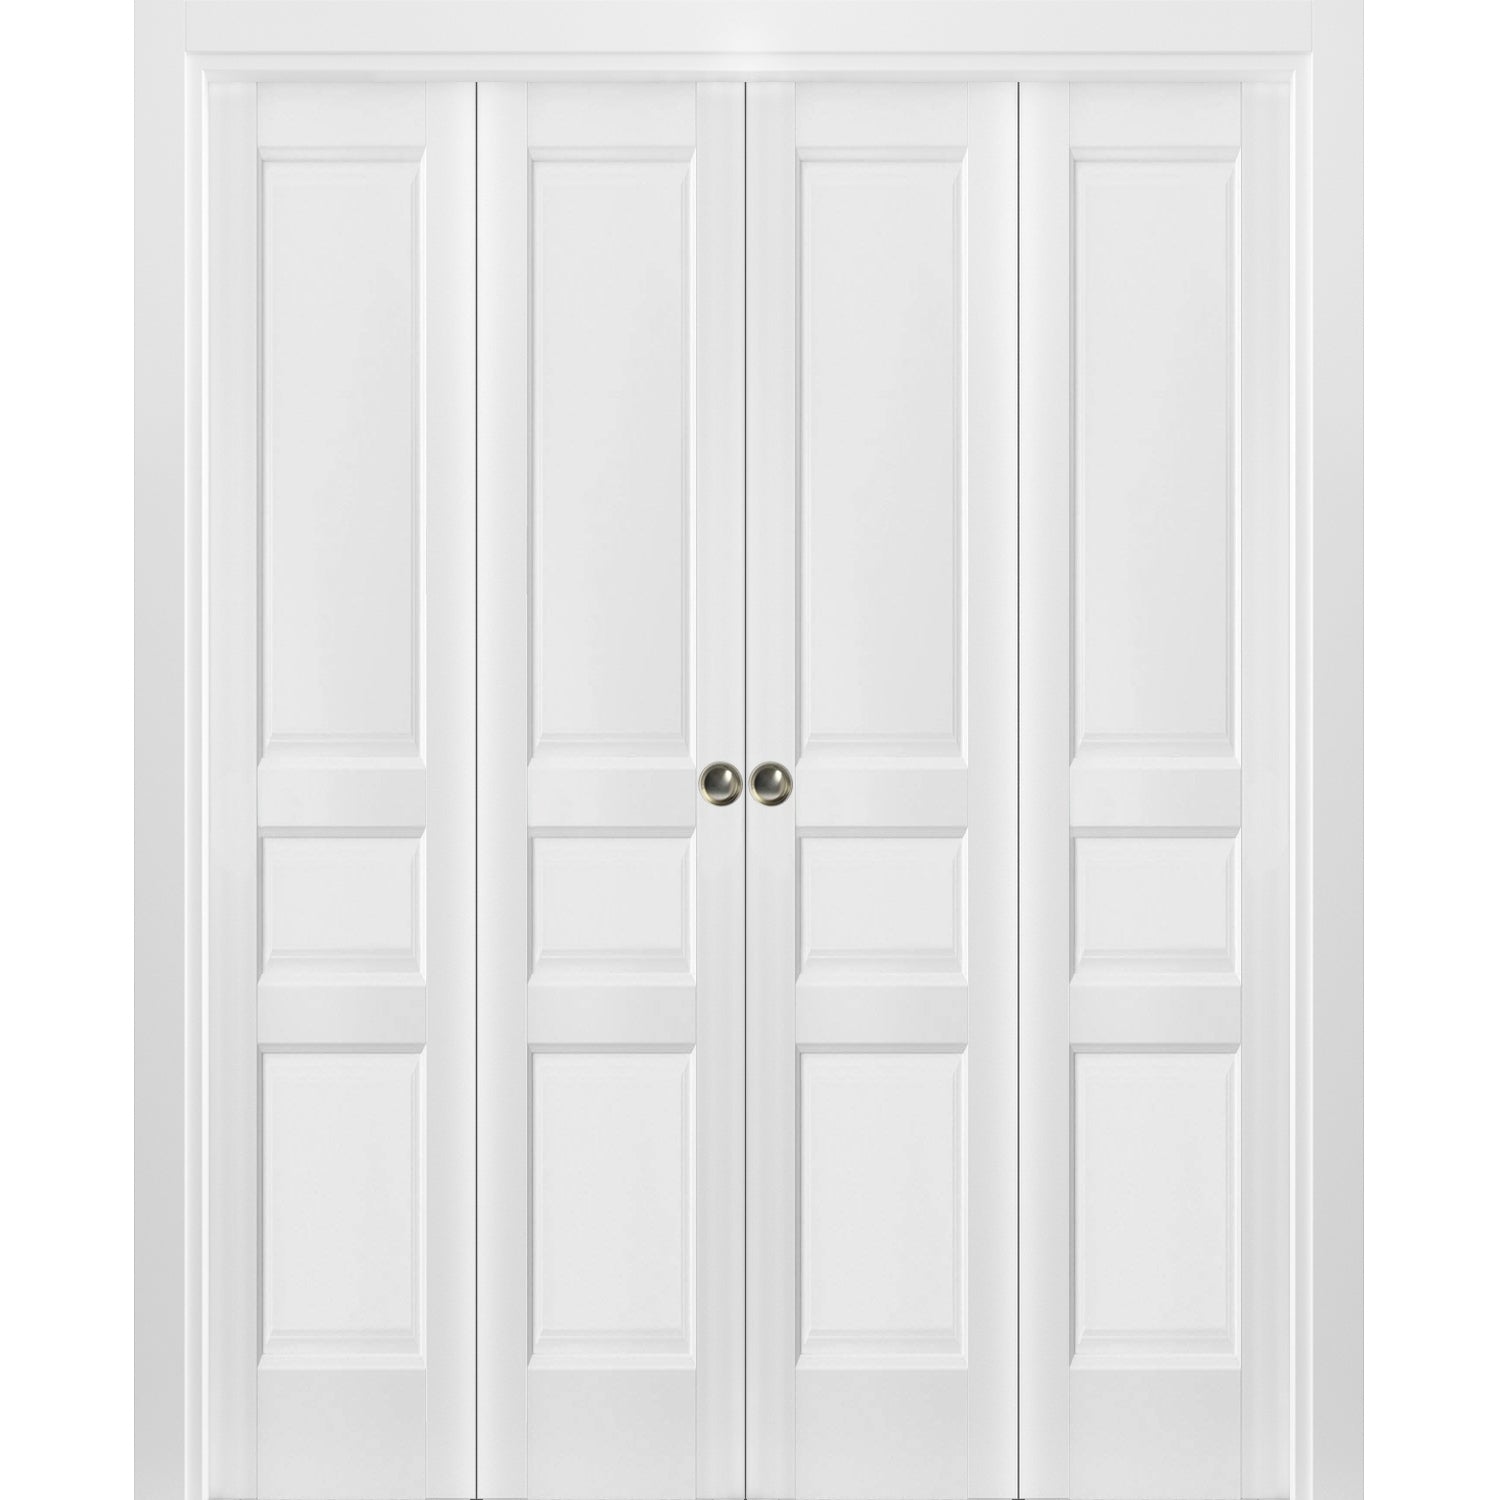 Pantry Kitchen 3-Panels Door with Hardware | Lucia 31 White Silk ...